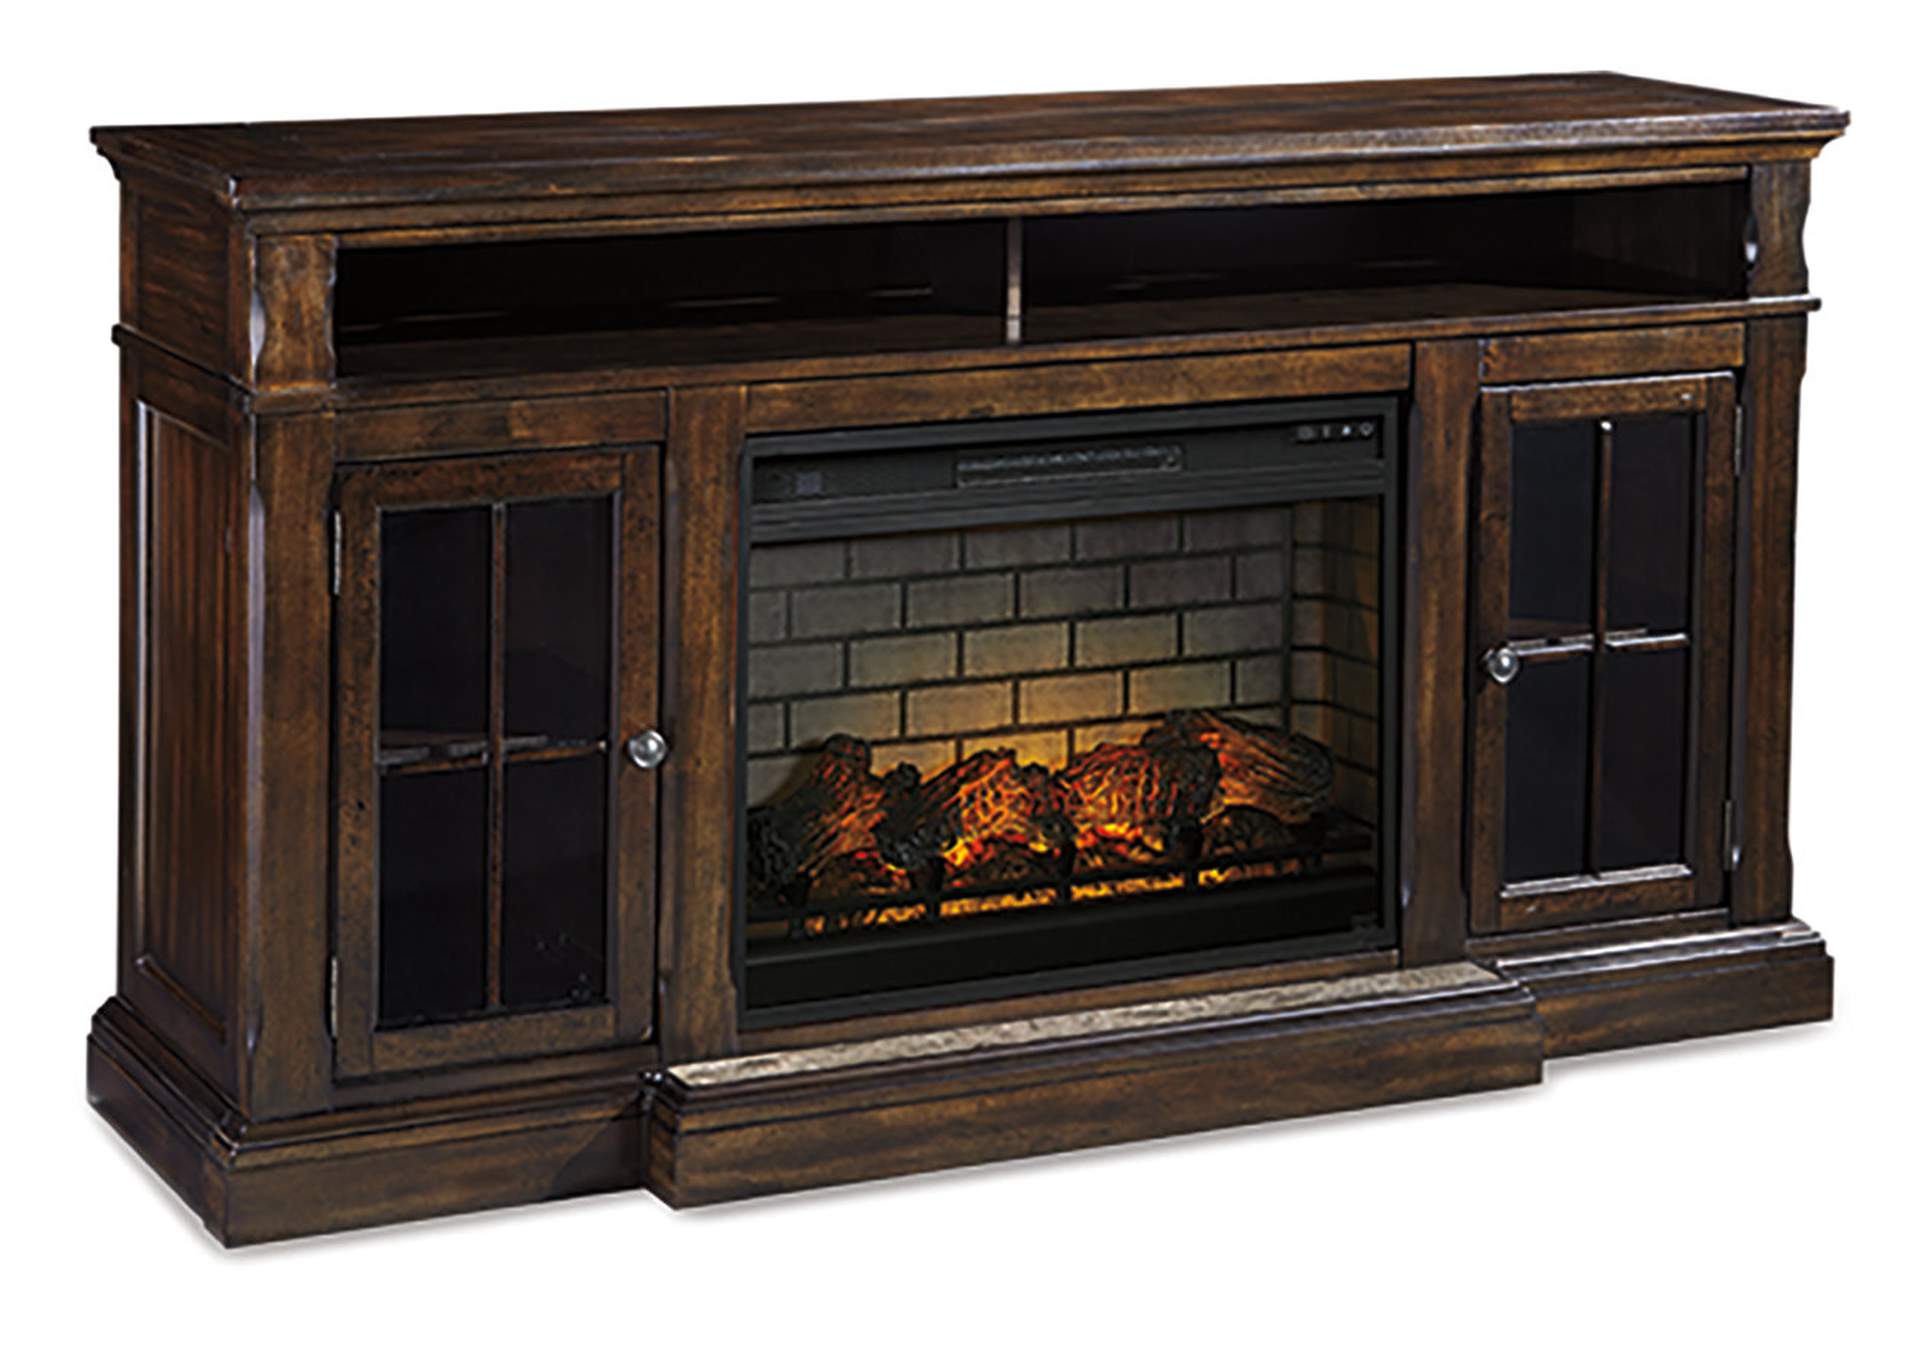 Roddinton 72" TV Stand with Electric Fireplace,Signature Design By Ashley